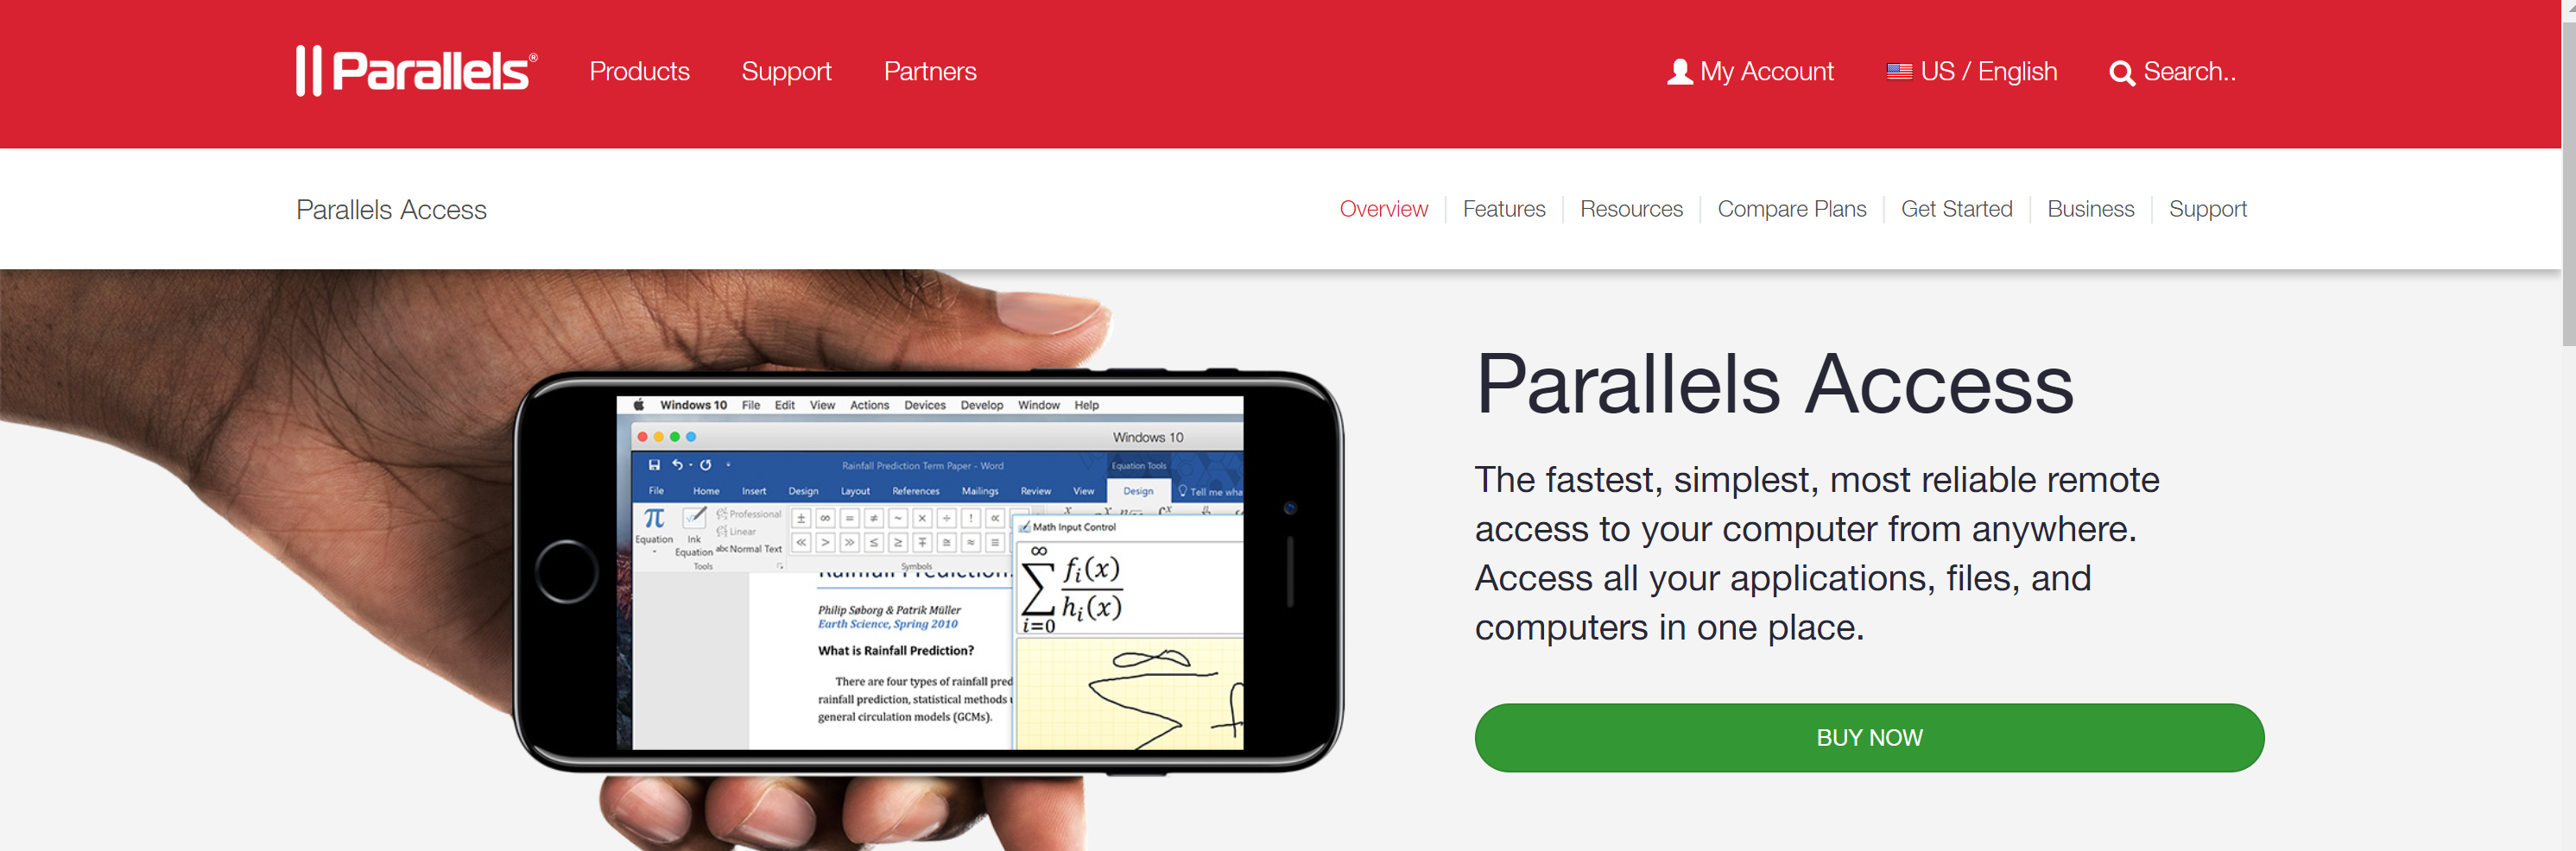 Parallels access review